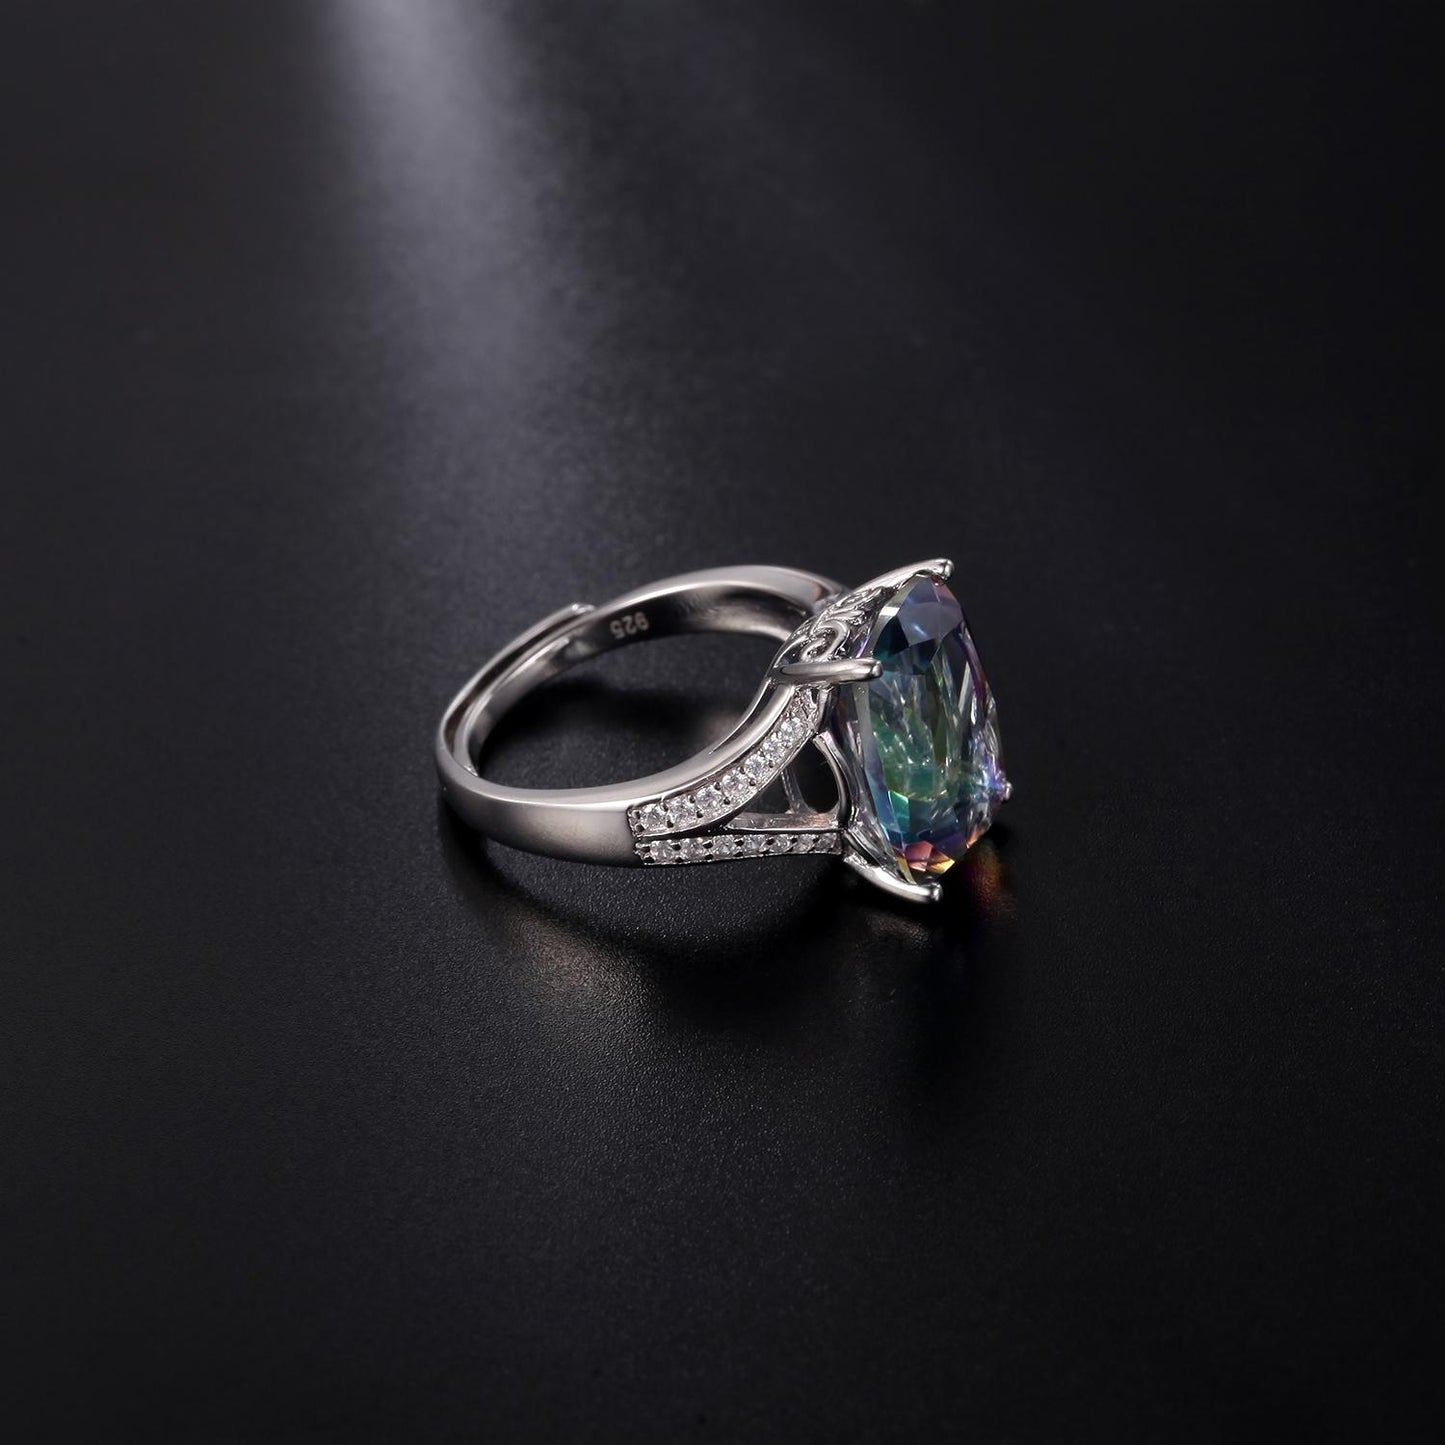 GEM&#39;S BALLET 9.66Ct 10x14mm Cushion Mystic Rainbow Topaz Statement Ring in Sterling Silver Adjustable Ring For Women